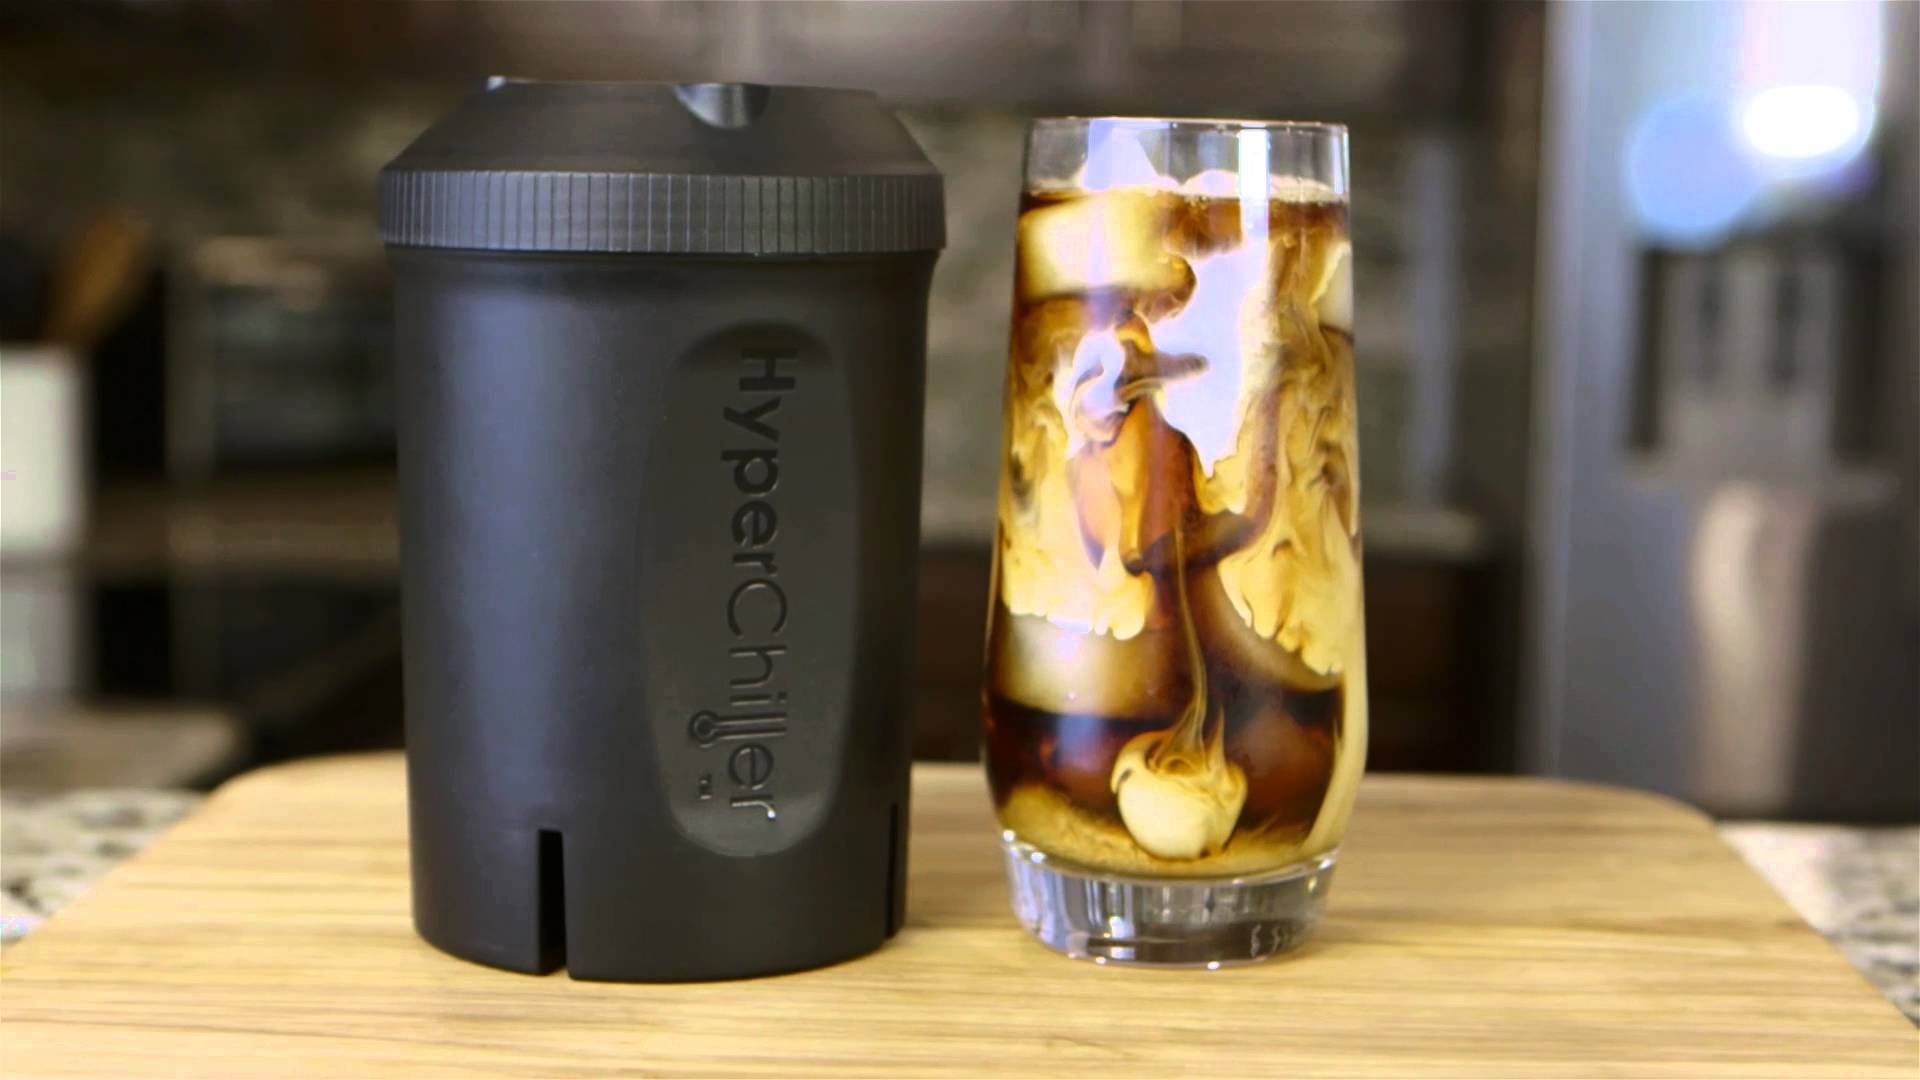 At home iced coffee using hyper chiller #icedcoffee #nespresso #hyperc